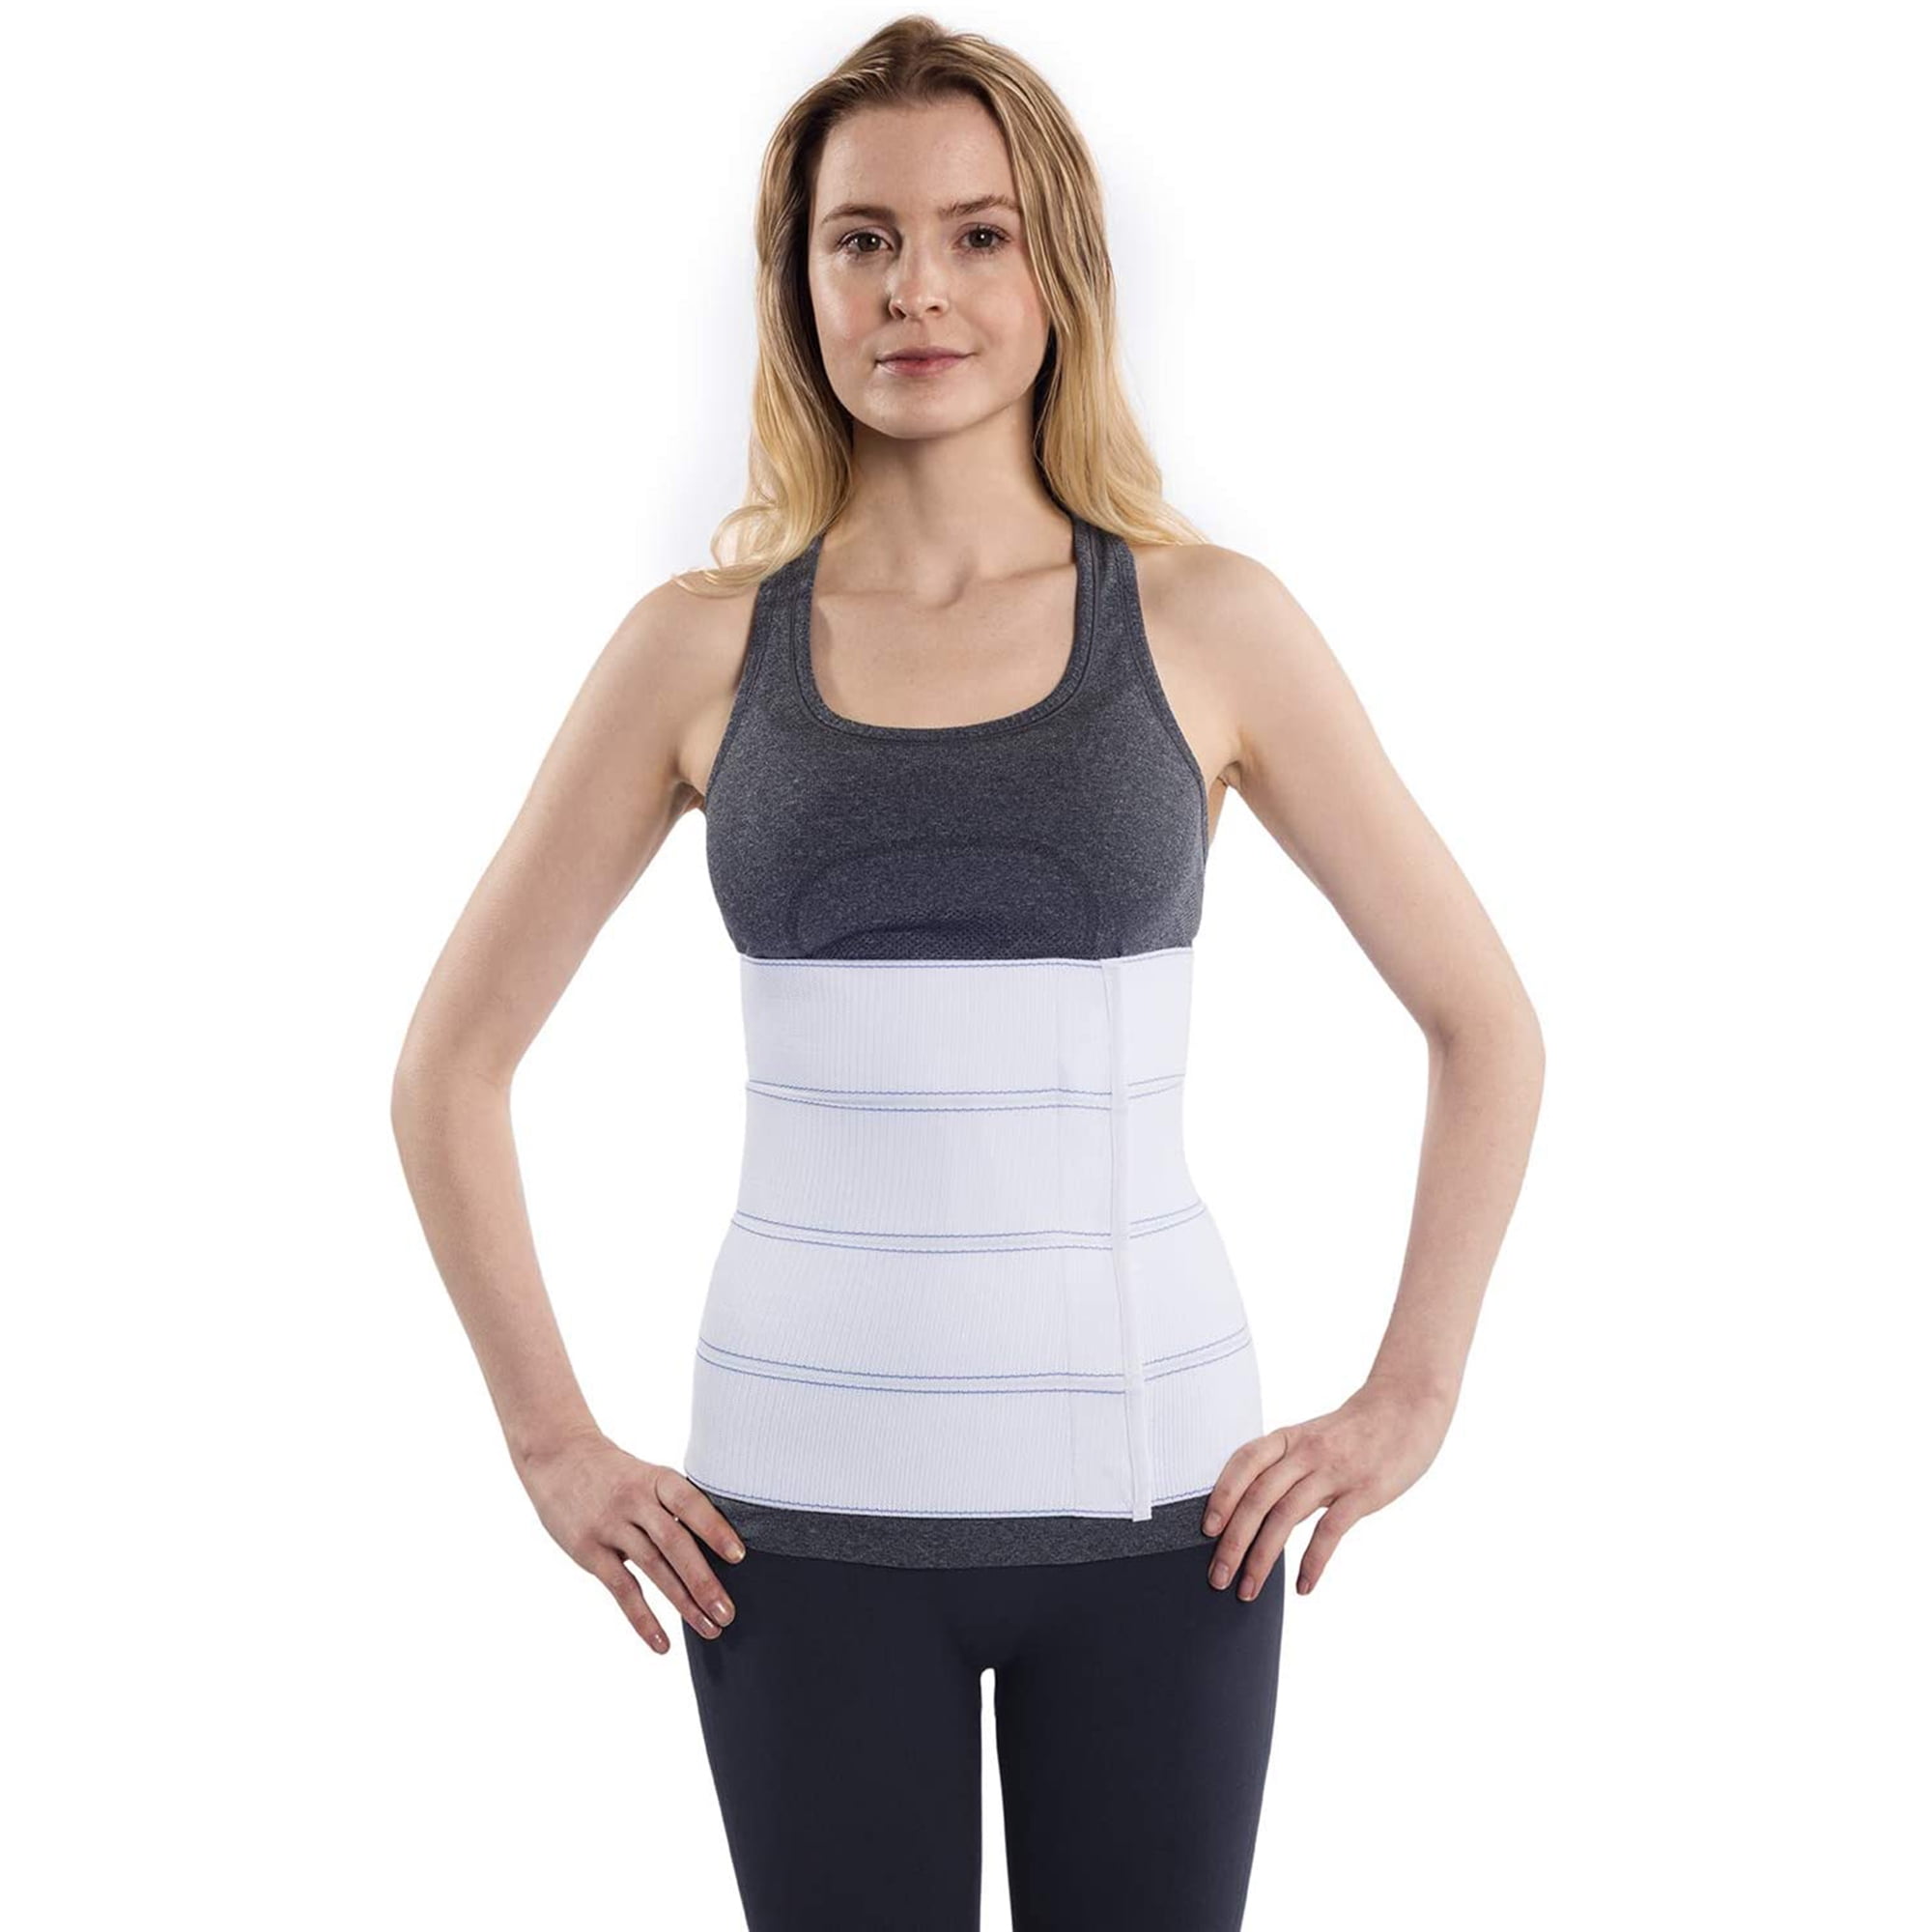 NYOrtho Abdominal Binder Compression Wrap Lower Waist & Belly Support Band, 4 Panel 45" to 60" - image 1 of 7